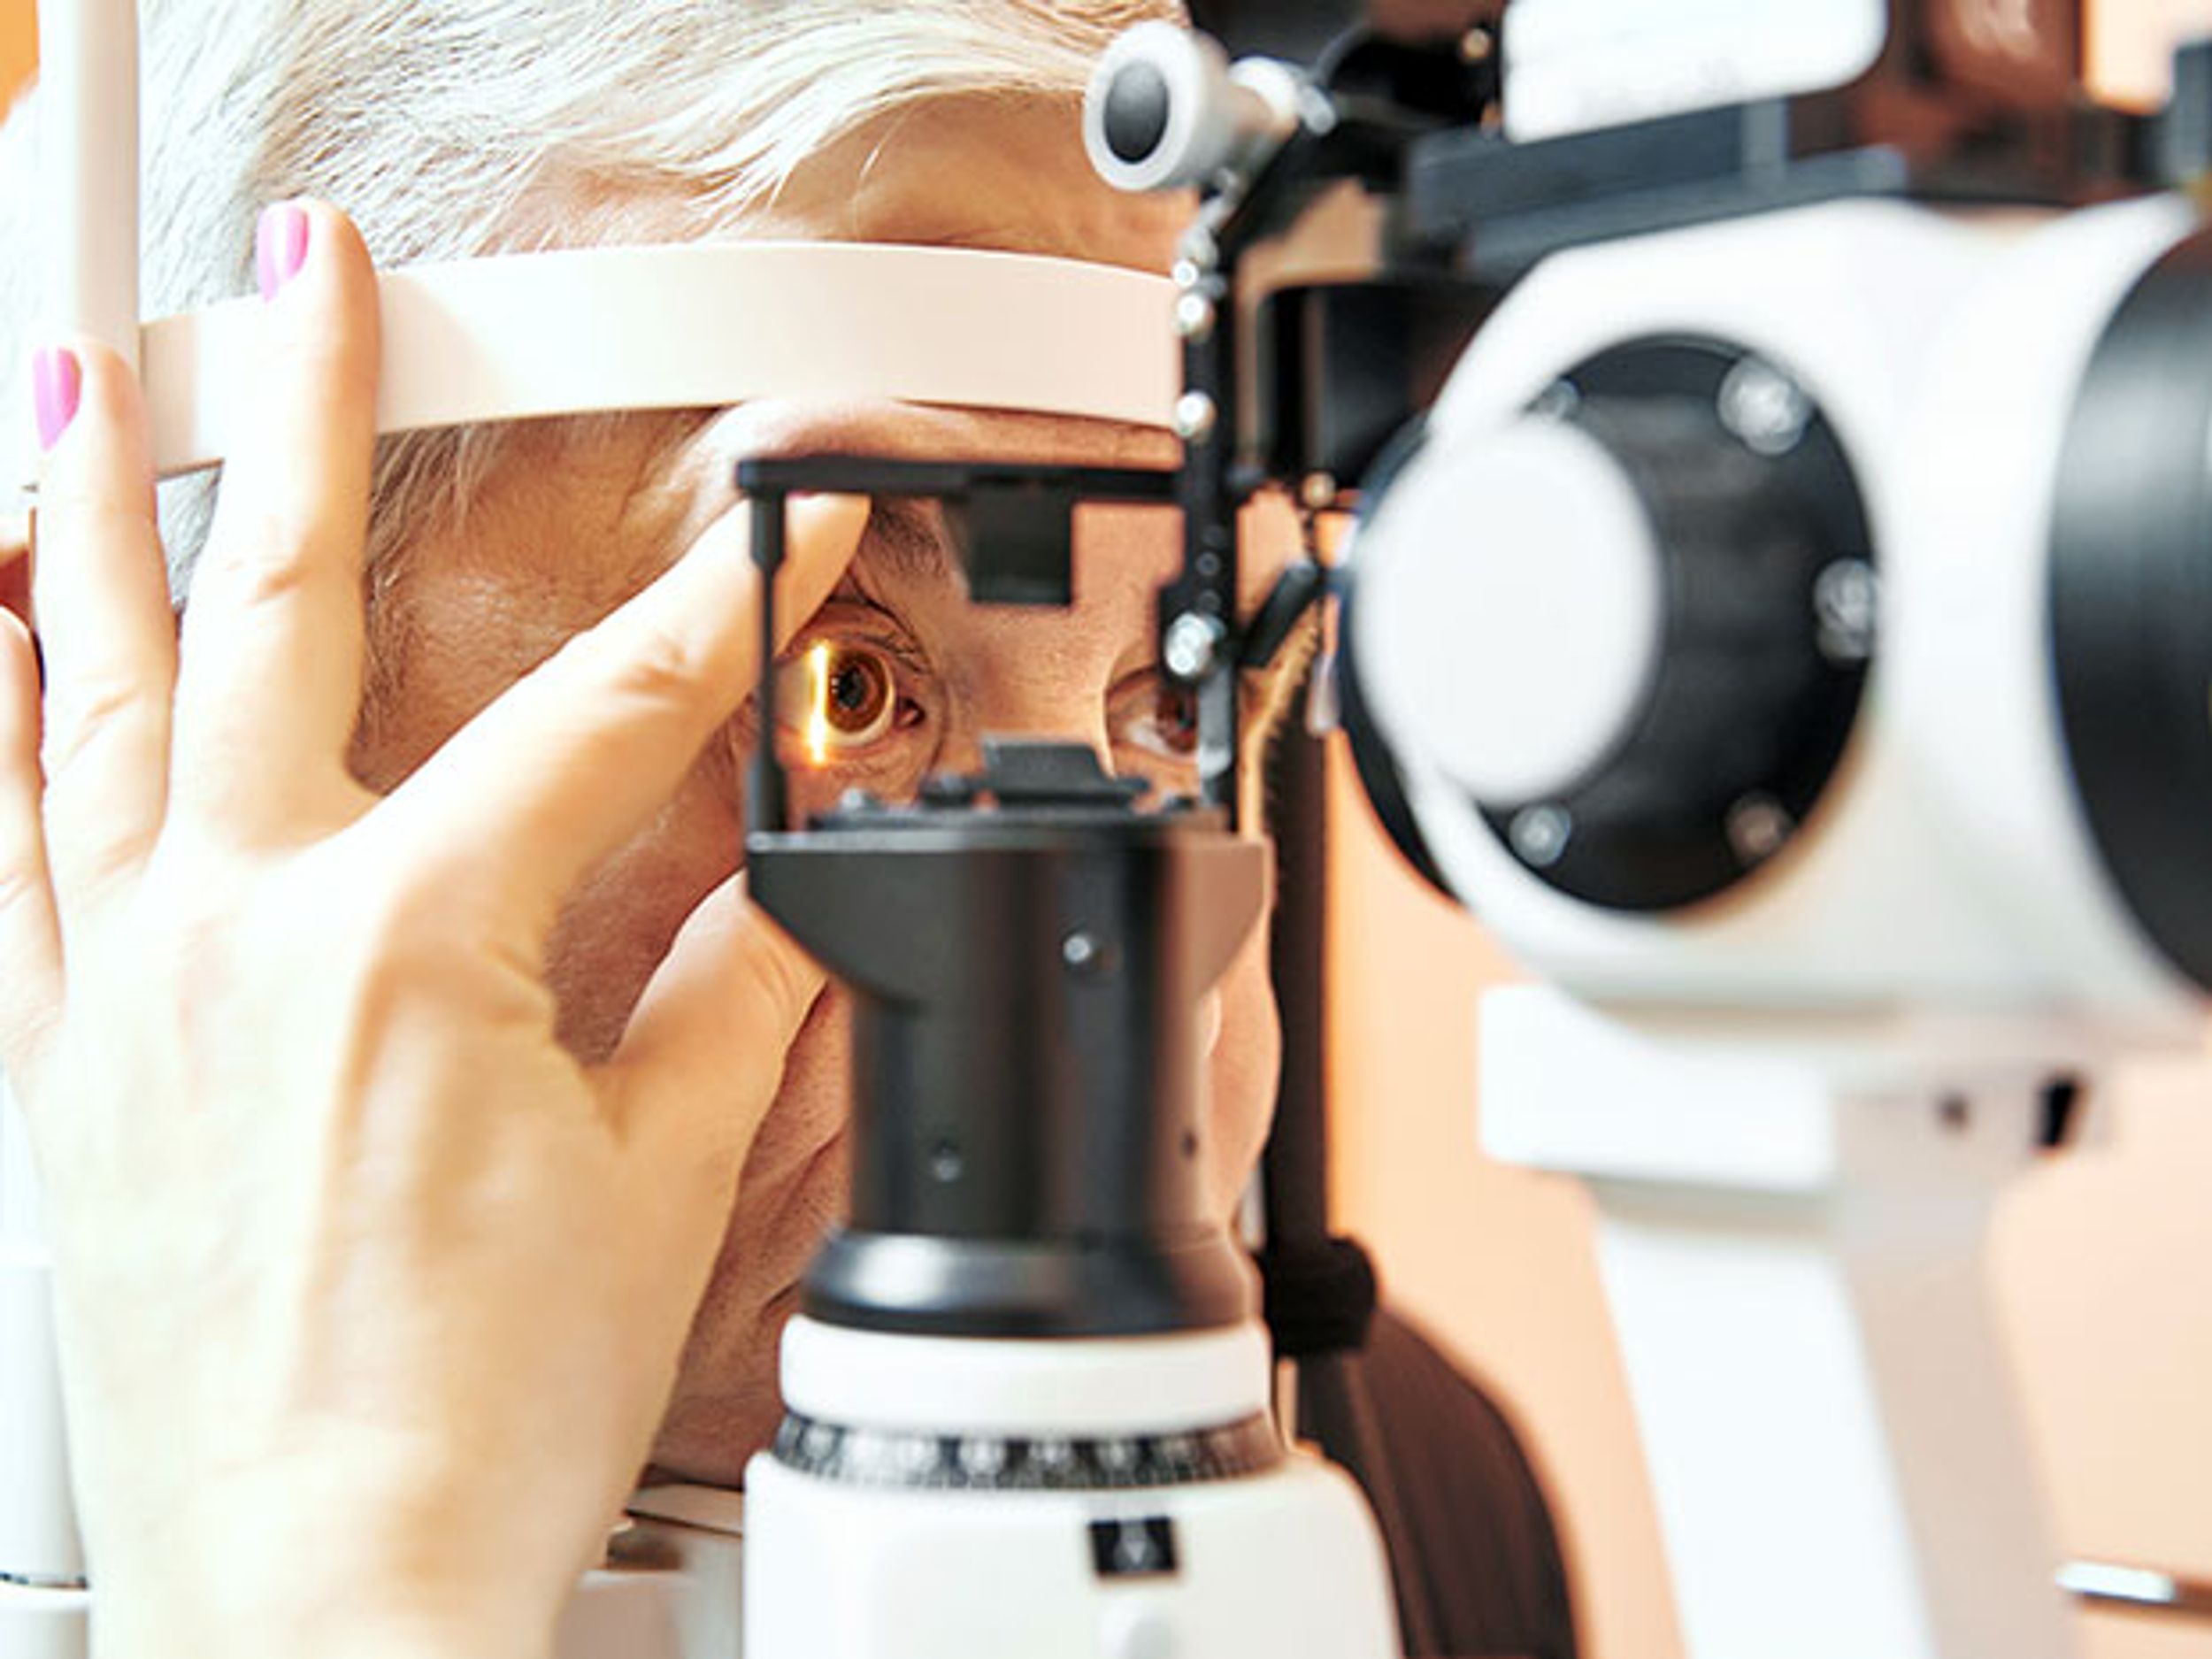 A patient's eye is examined for signs of disease